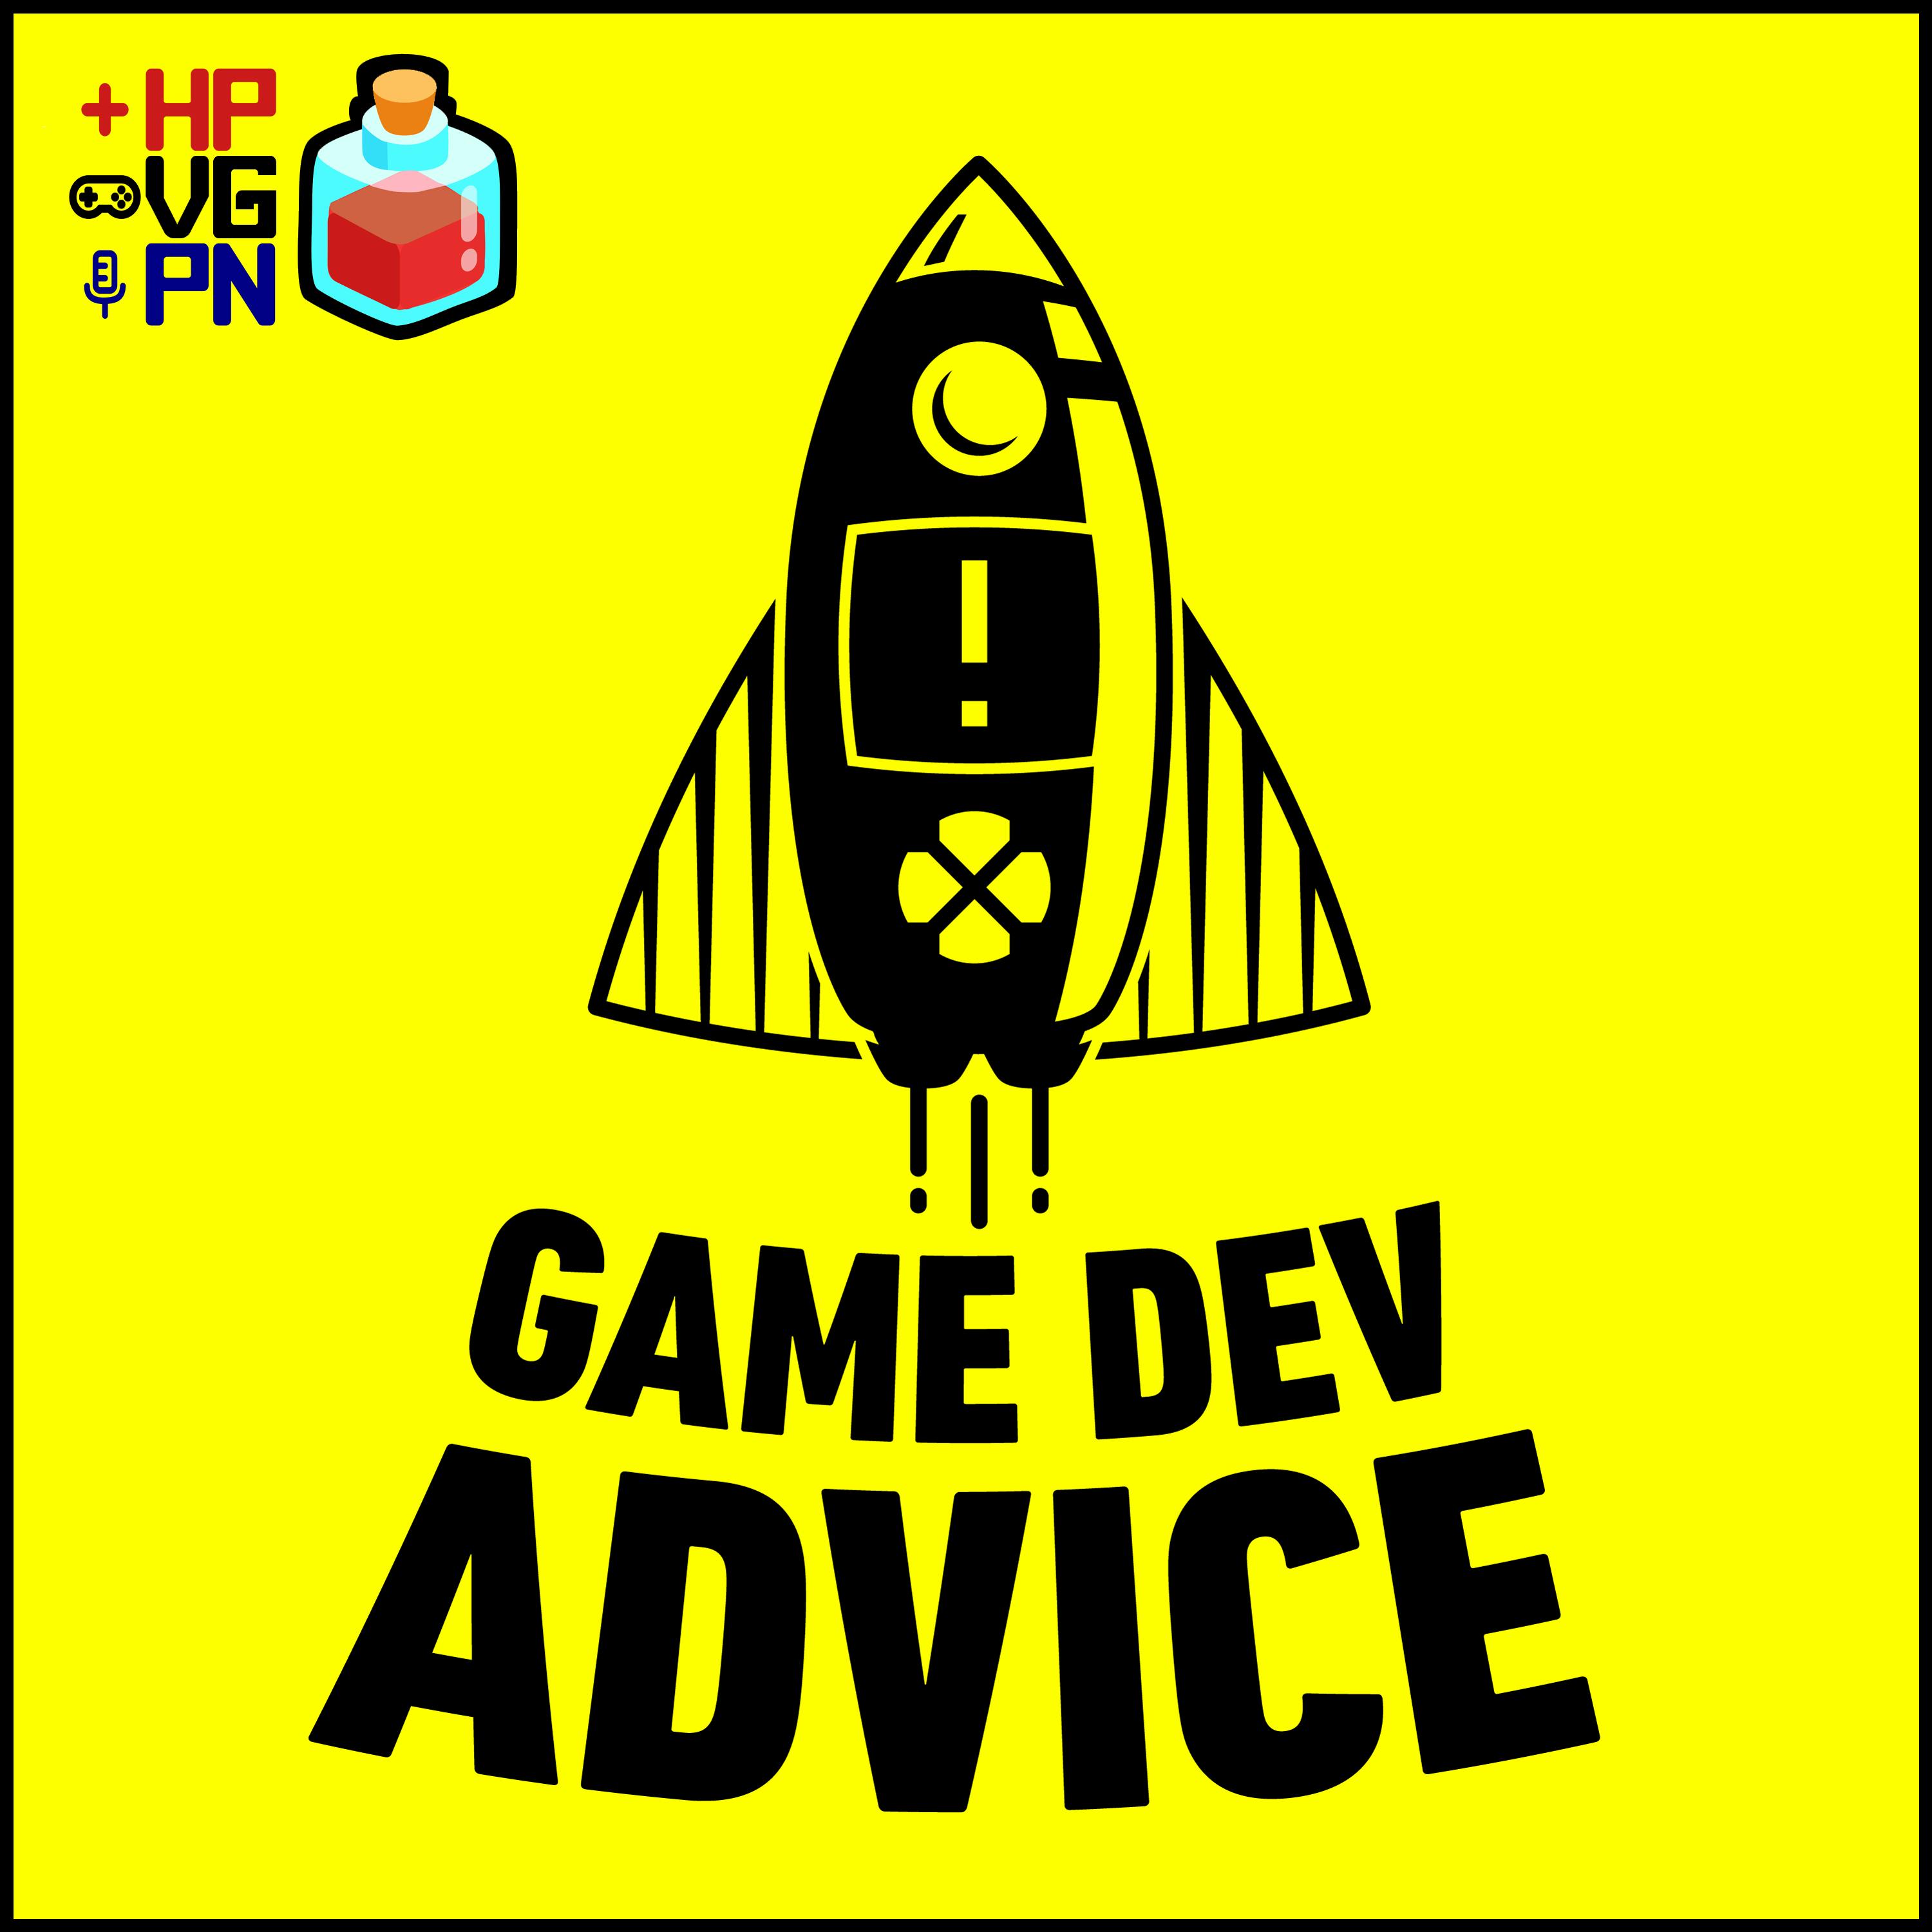 Making RPGs, Remote Manager Challenges, Porting GTA Vice City, How To Get Promoted, the Power of Messaging Apps, German Game Dev, Resident Evil Design, Working in Different Roles, and The Settlers with Jurie Horneman